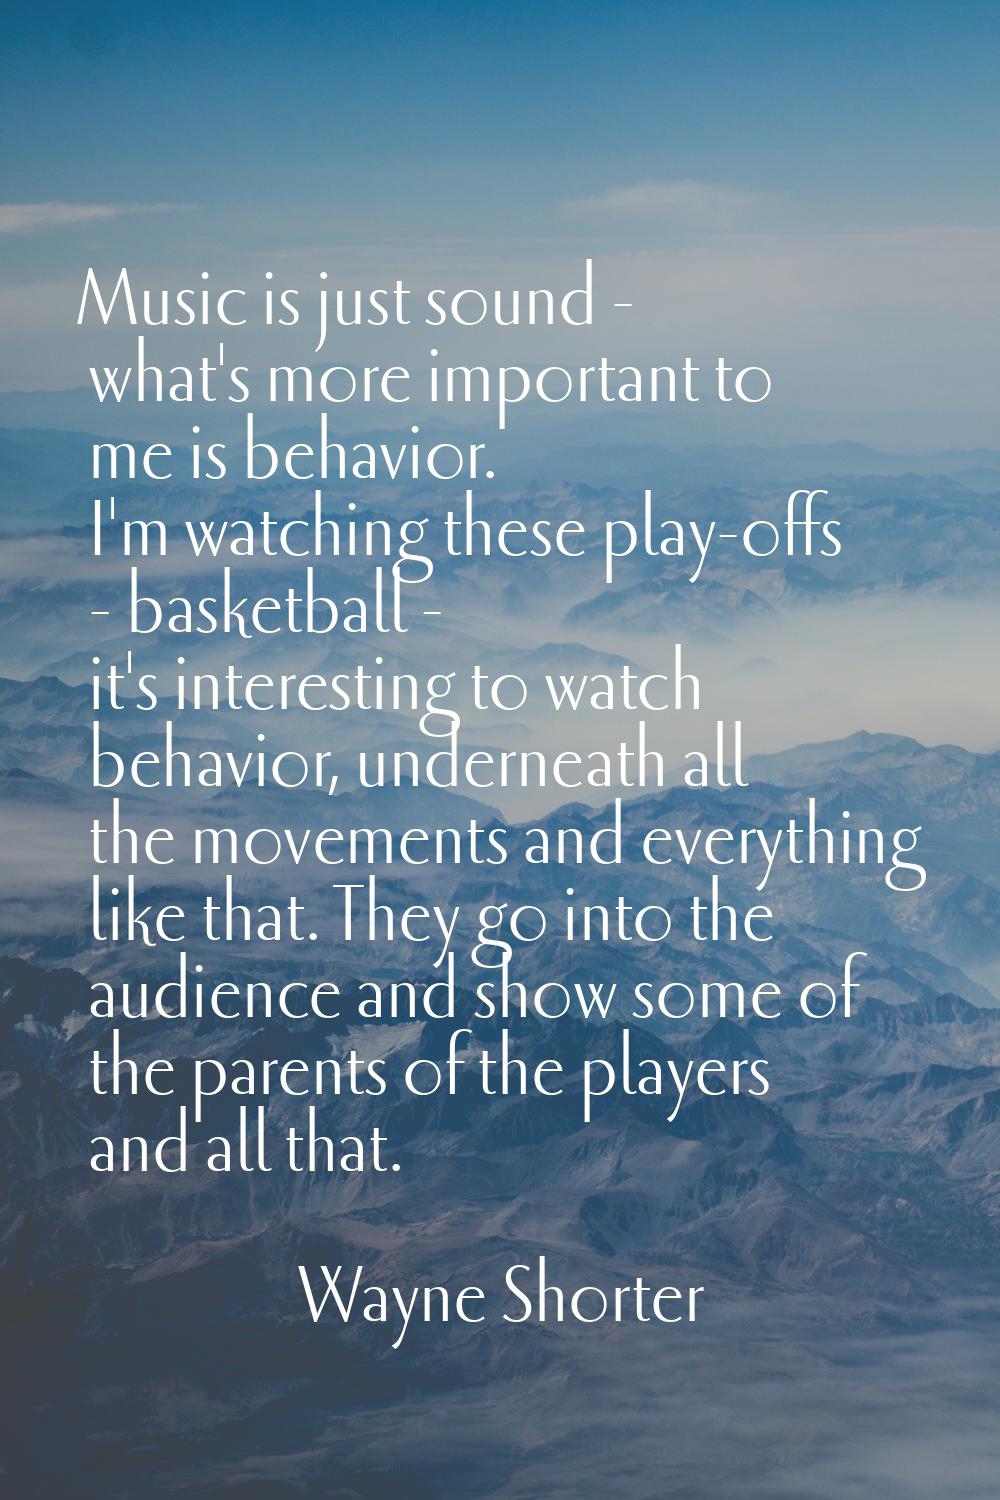 Music is just sound - what's more important to me is behavior. I'm watching these play-offs - baske